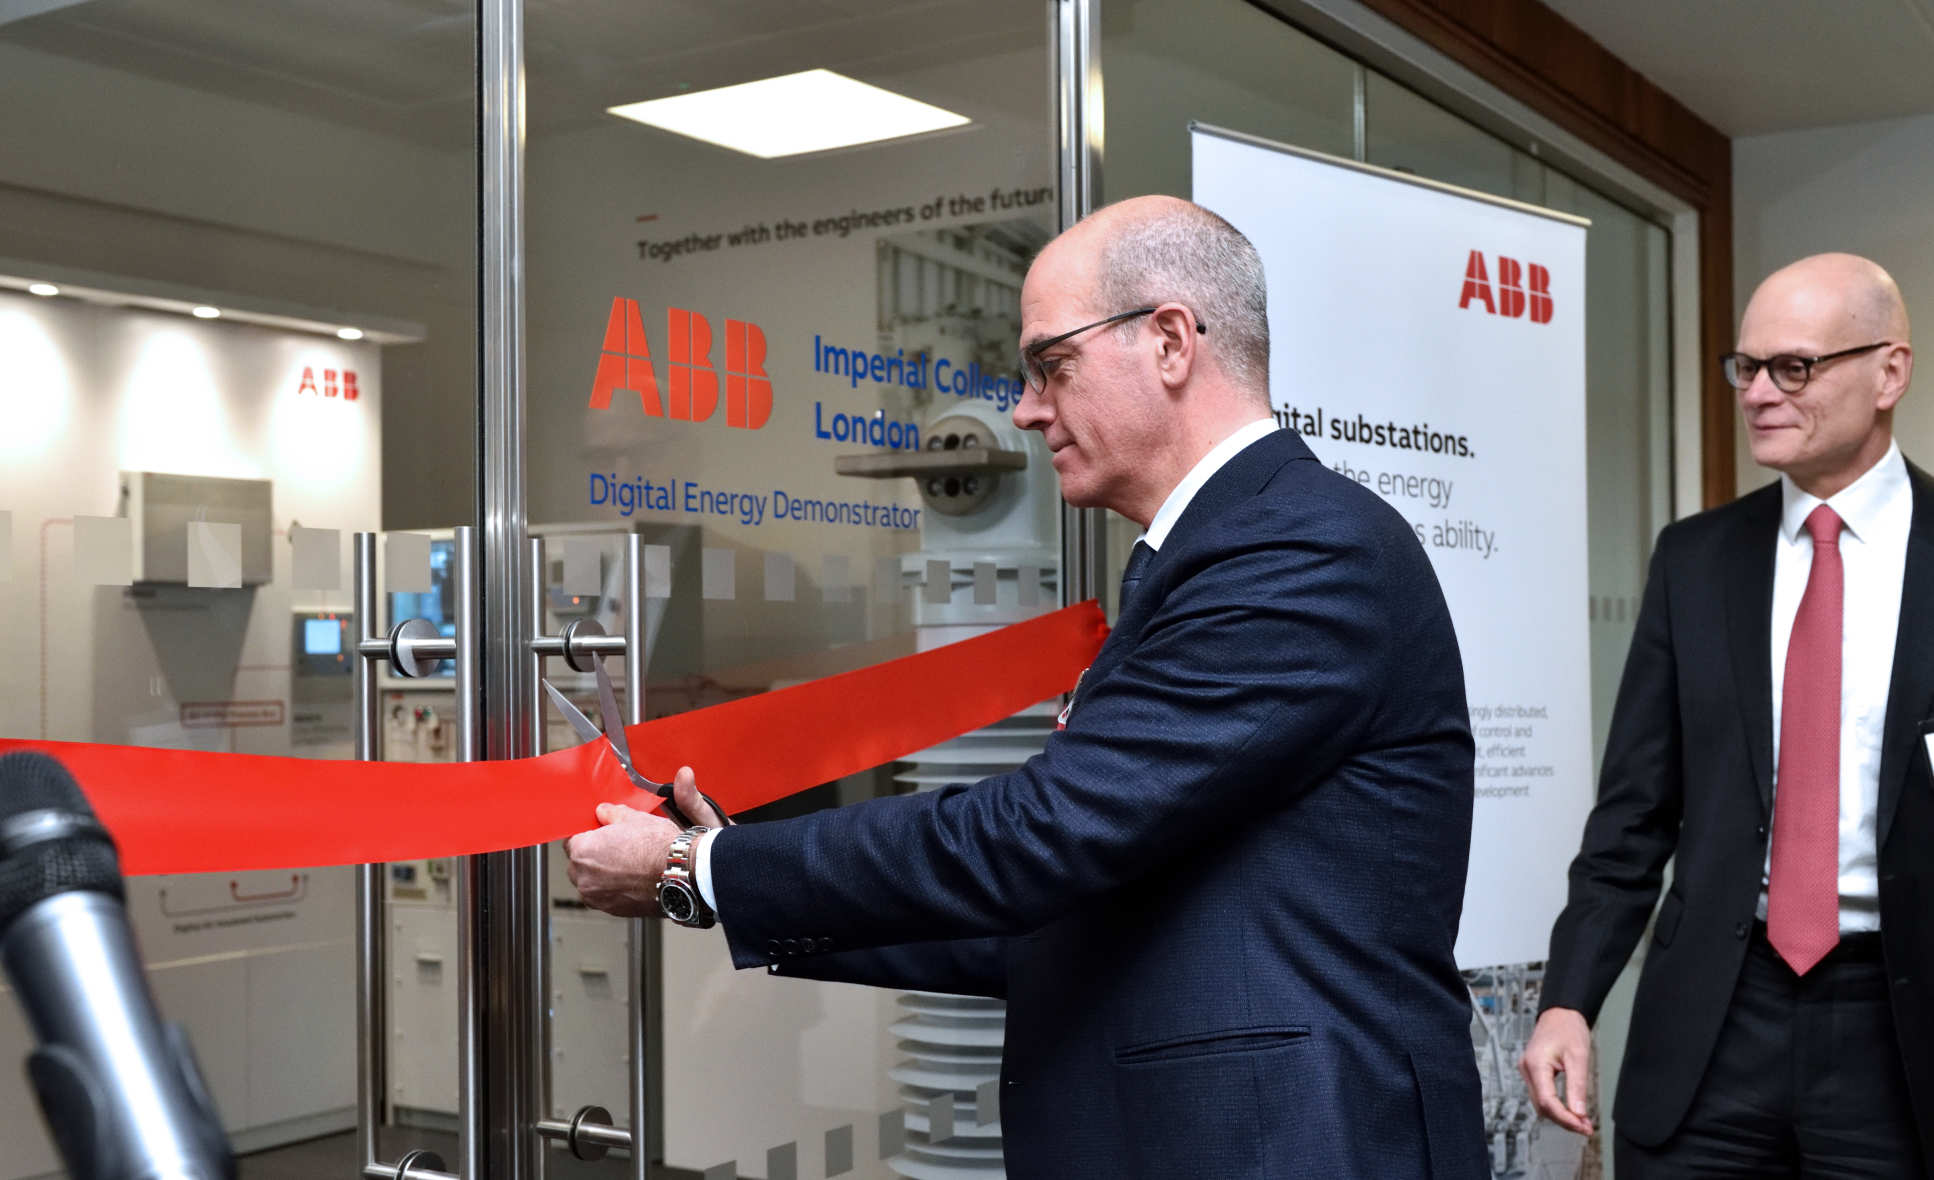 Claudioa facchin cutting the ribbon at the opening event for the ABB-Imperial Smart Energy Demonstrator